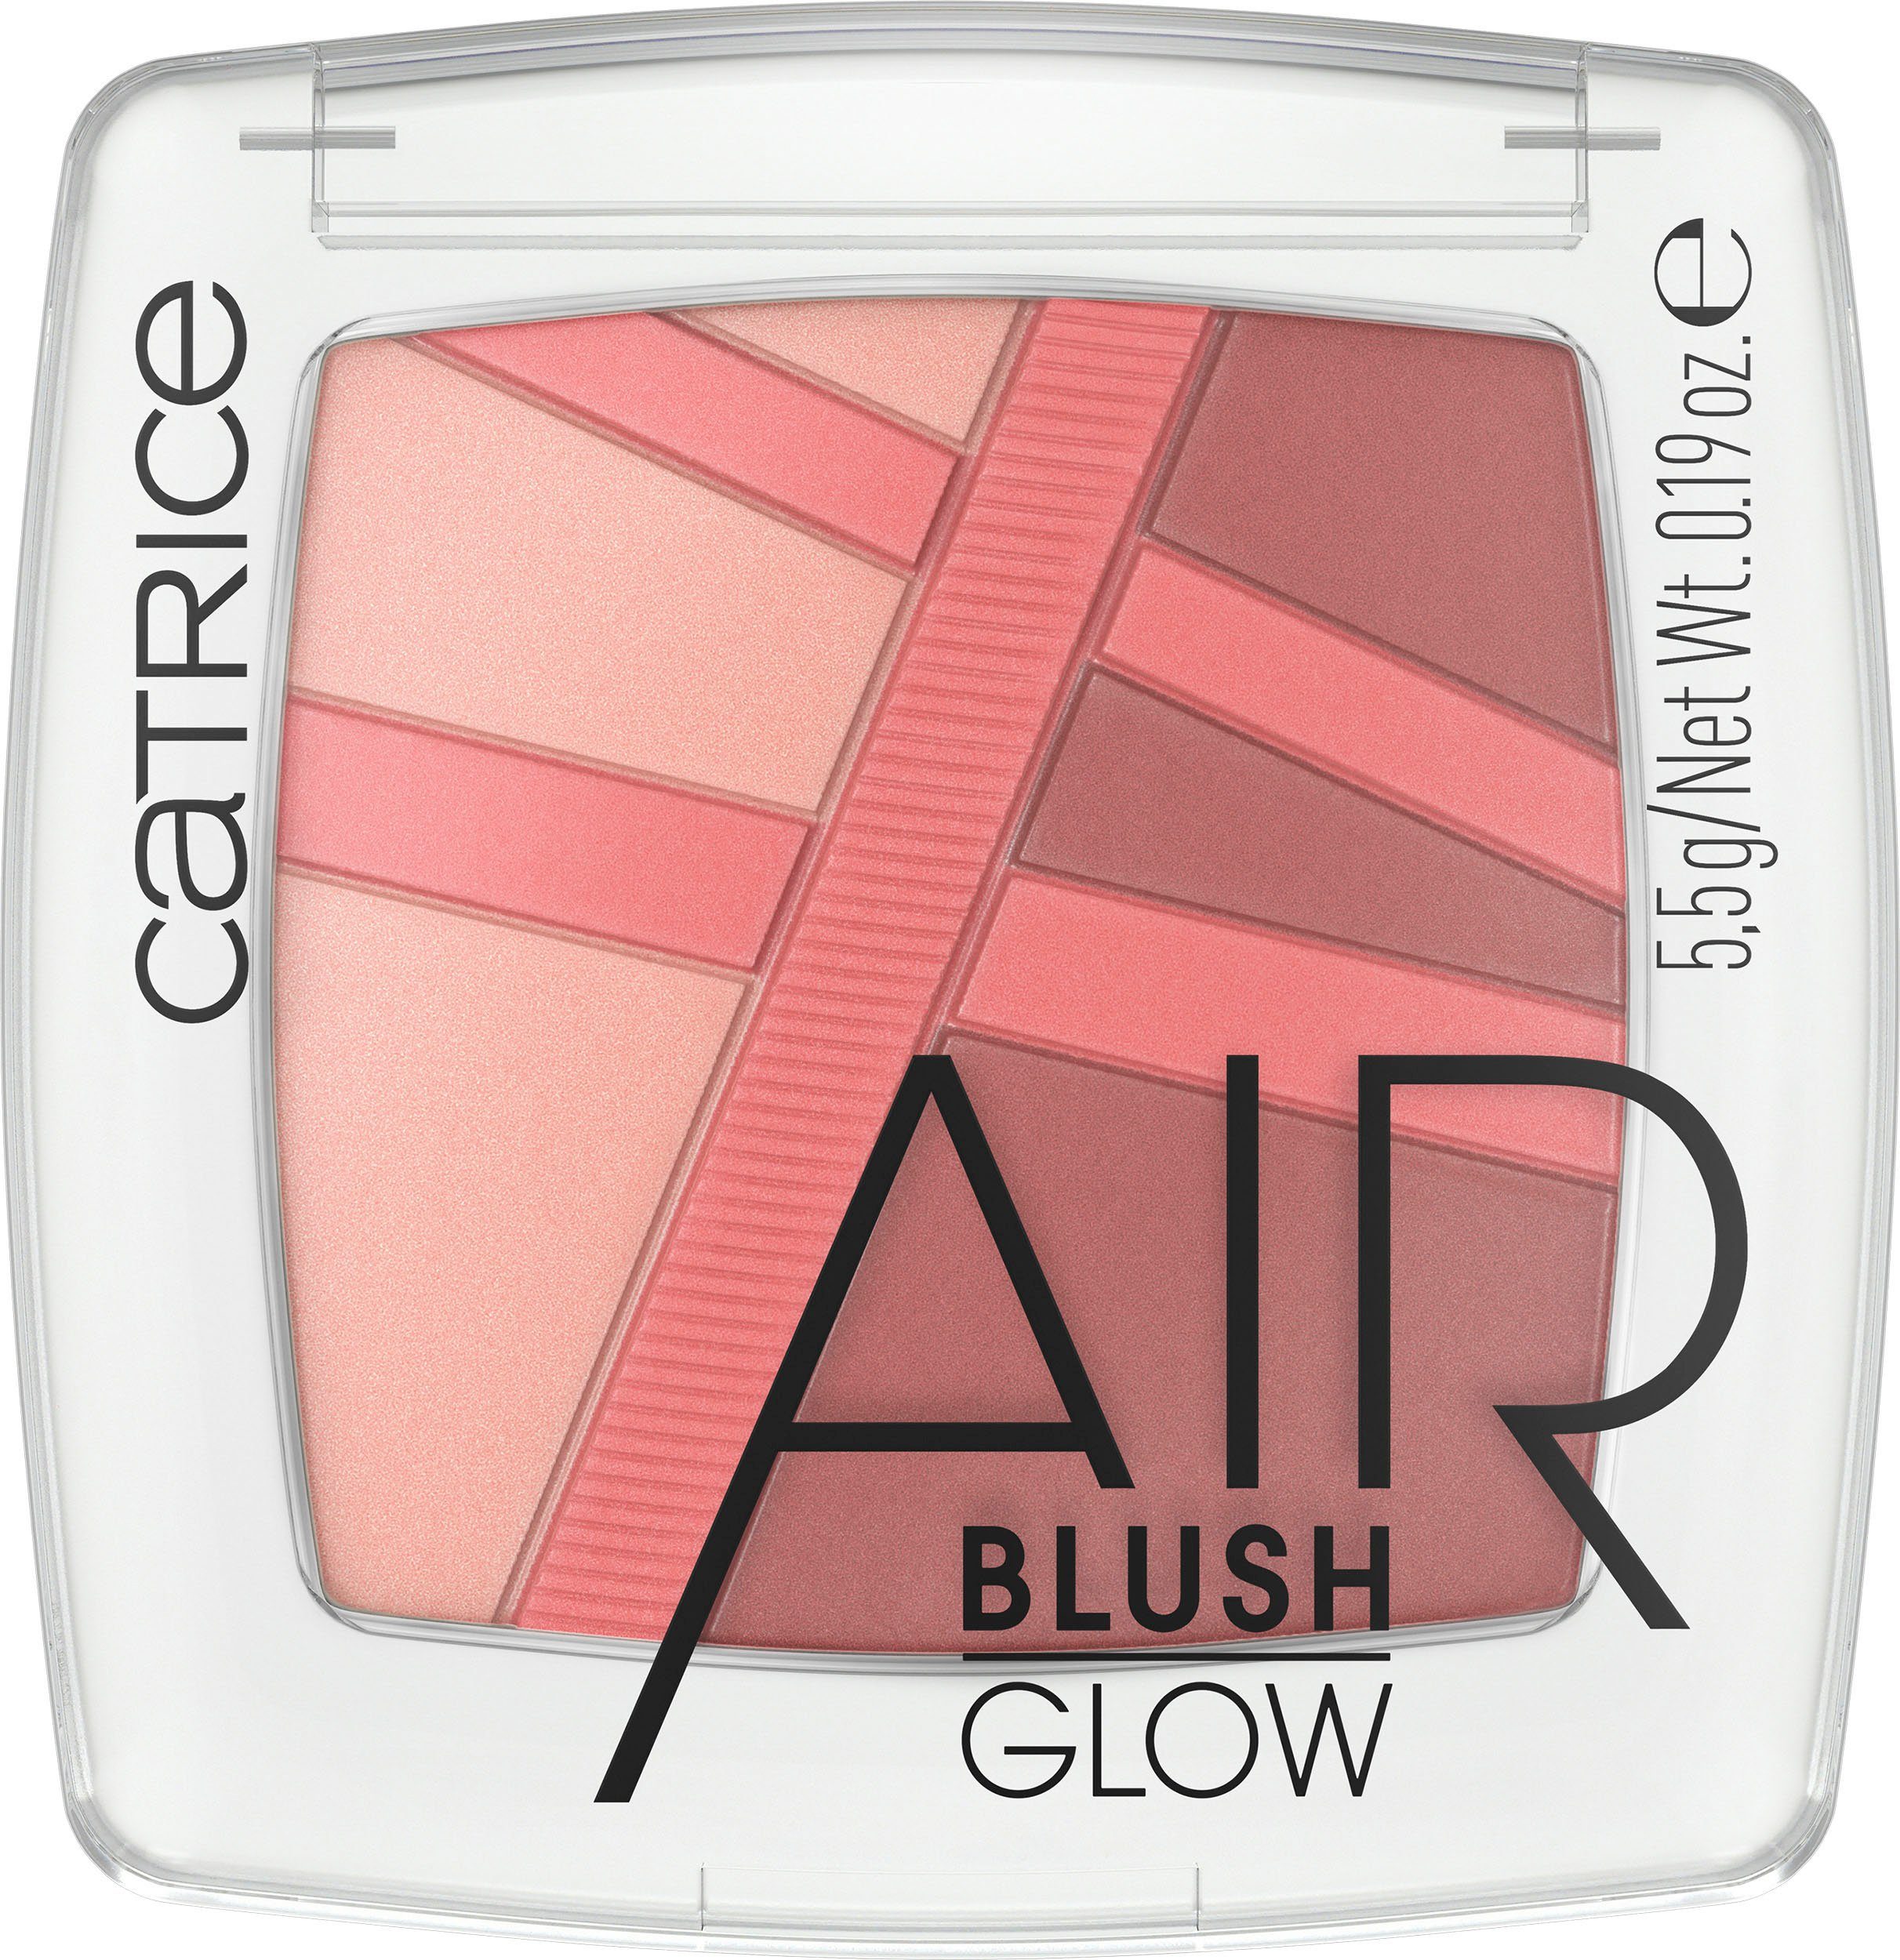 Glow, Cloud Catrice Rouge AirBlush 3-tlg. Wine Catrice